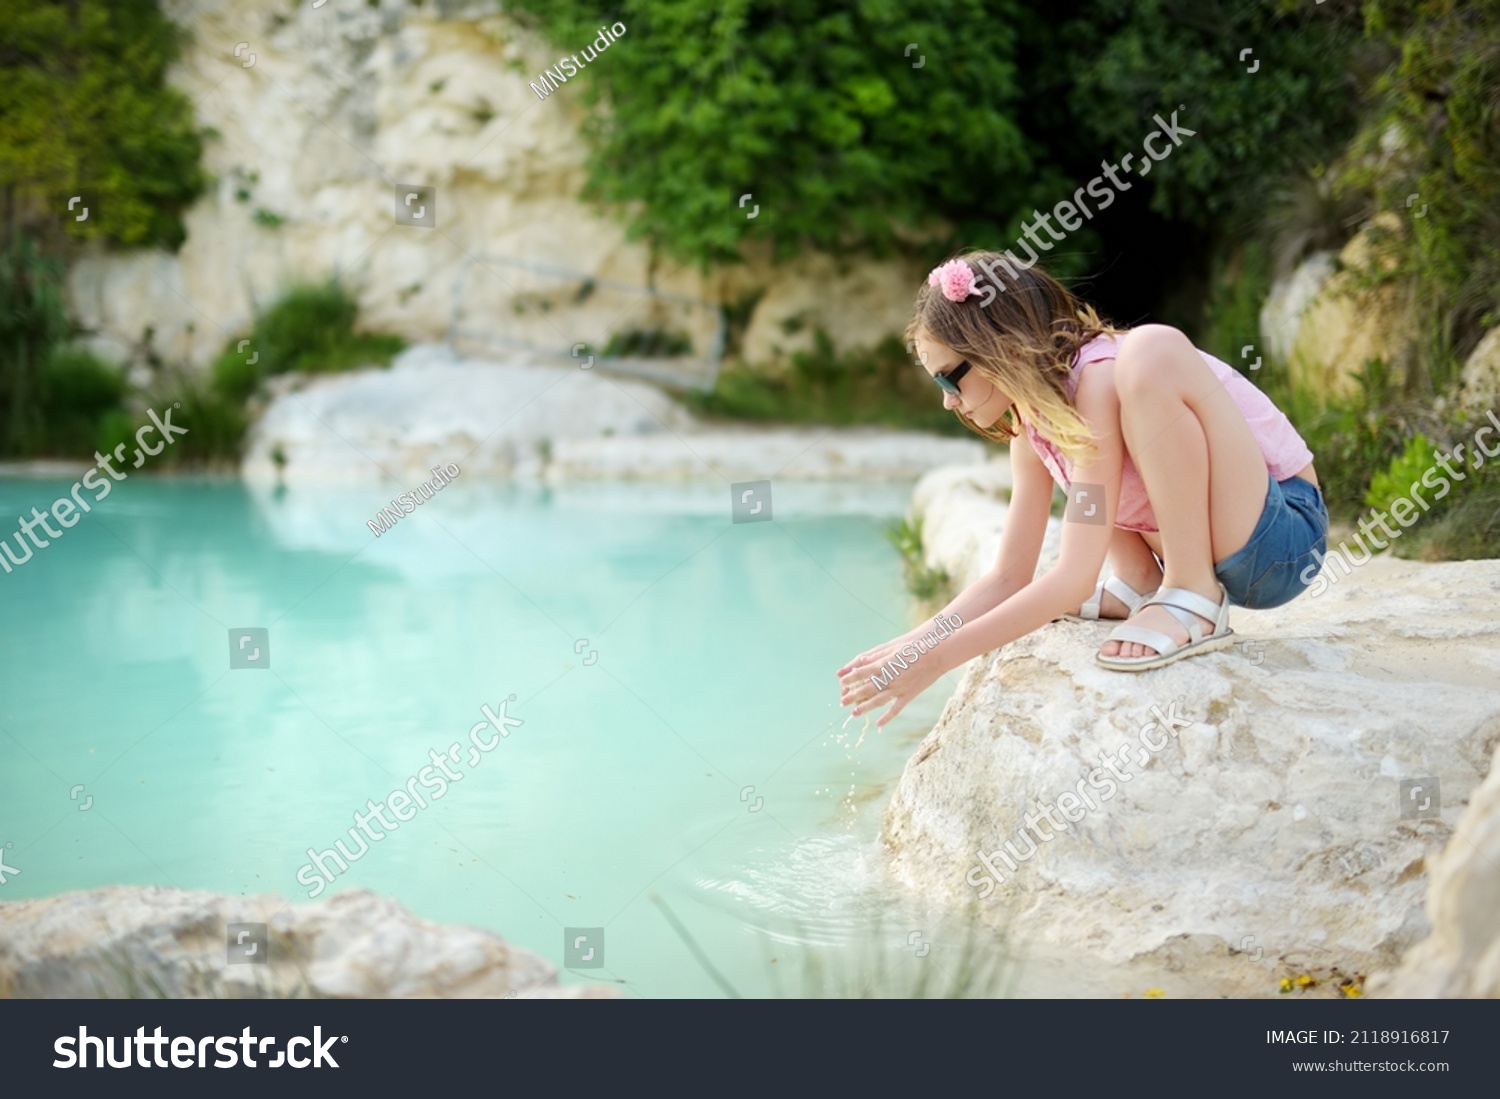 Young girl playing by natural swimming pool in Bagno Vignoni, with thermal spring water and calcium carbonate deposits, which form white concretions and waterfall. Tuscany, Italy. #2118916817